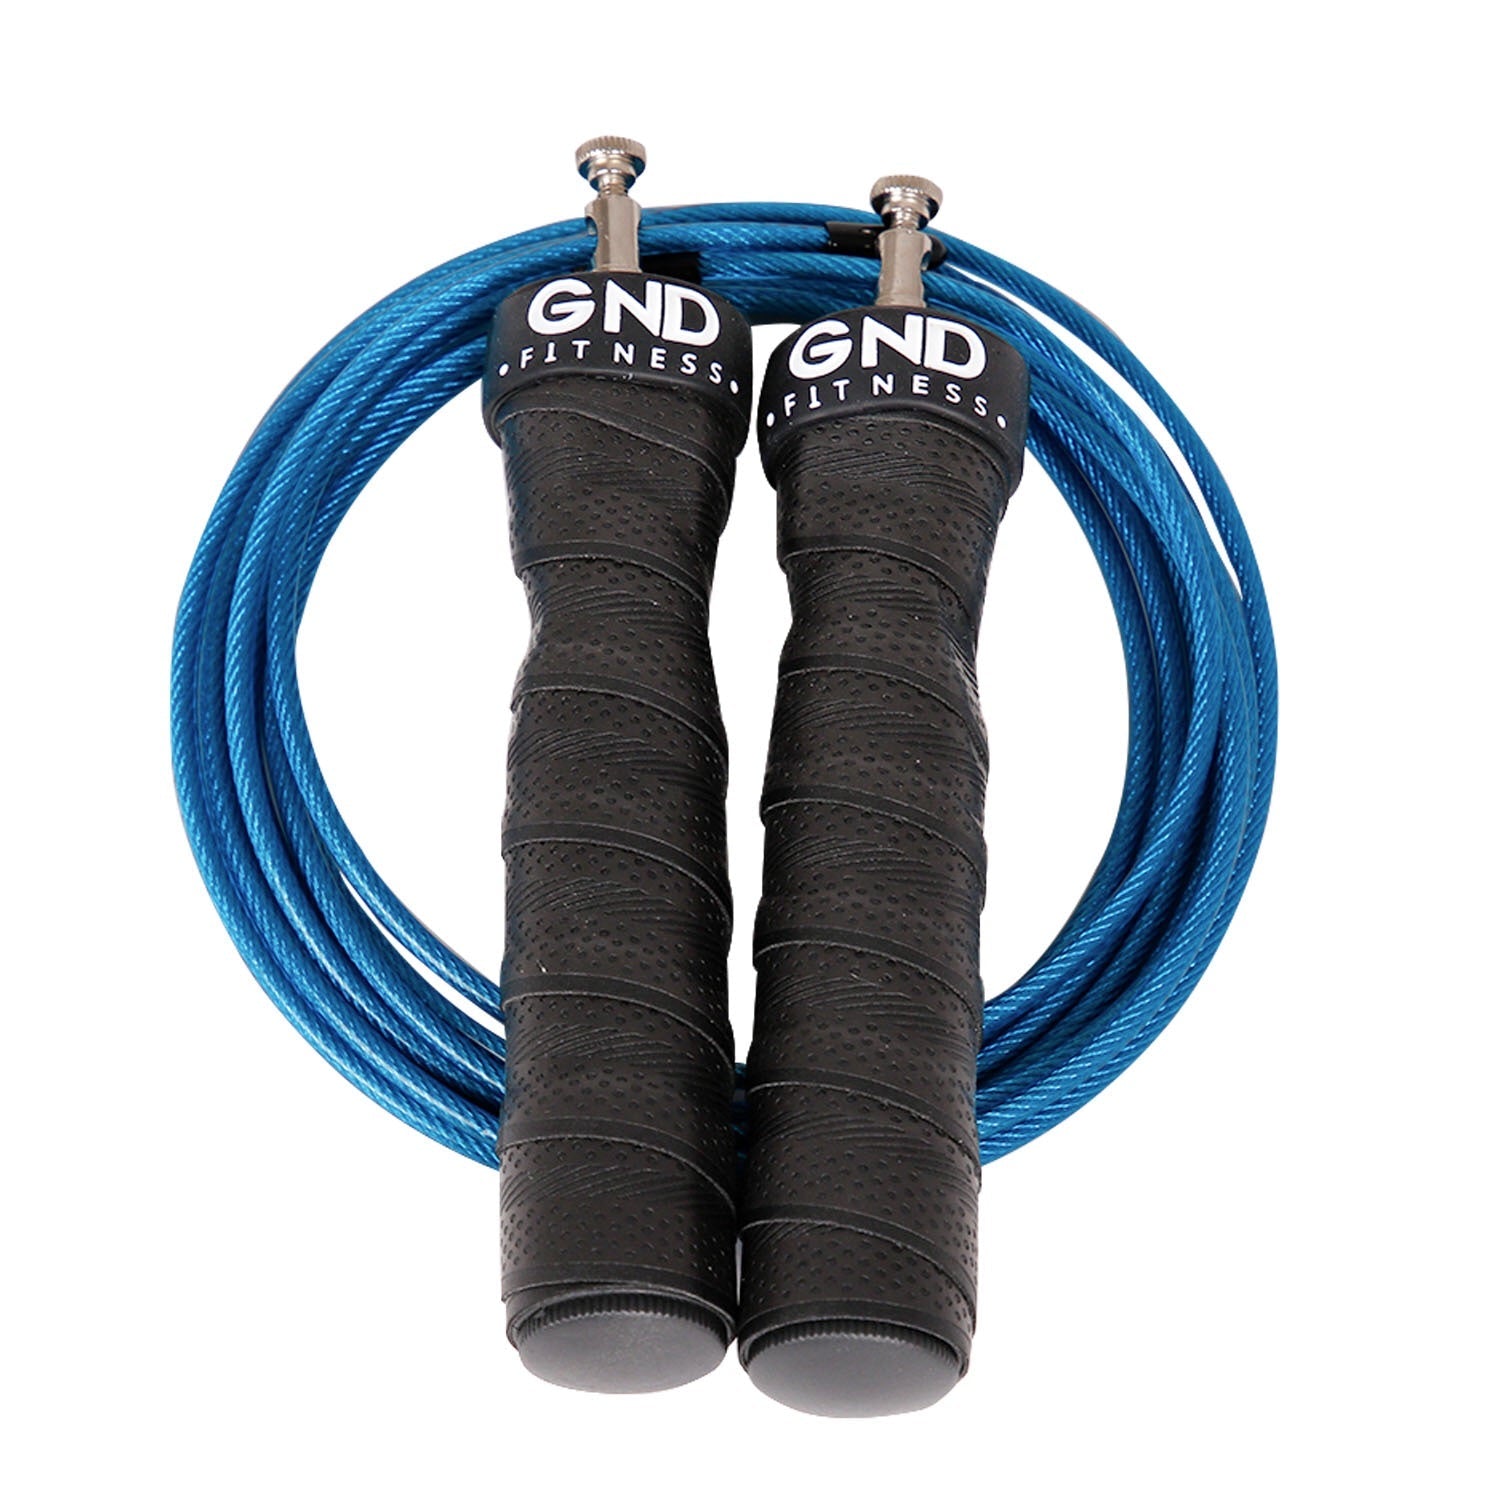 GND SR Speed Skipping Rope // Single Ball Bearing // Bullet Blue - SR Skipping Rope- GND Fitness